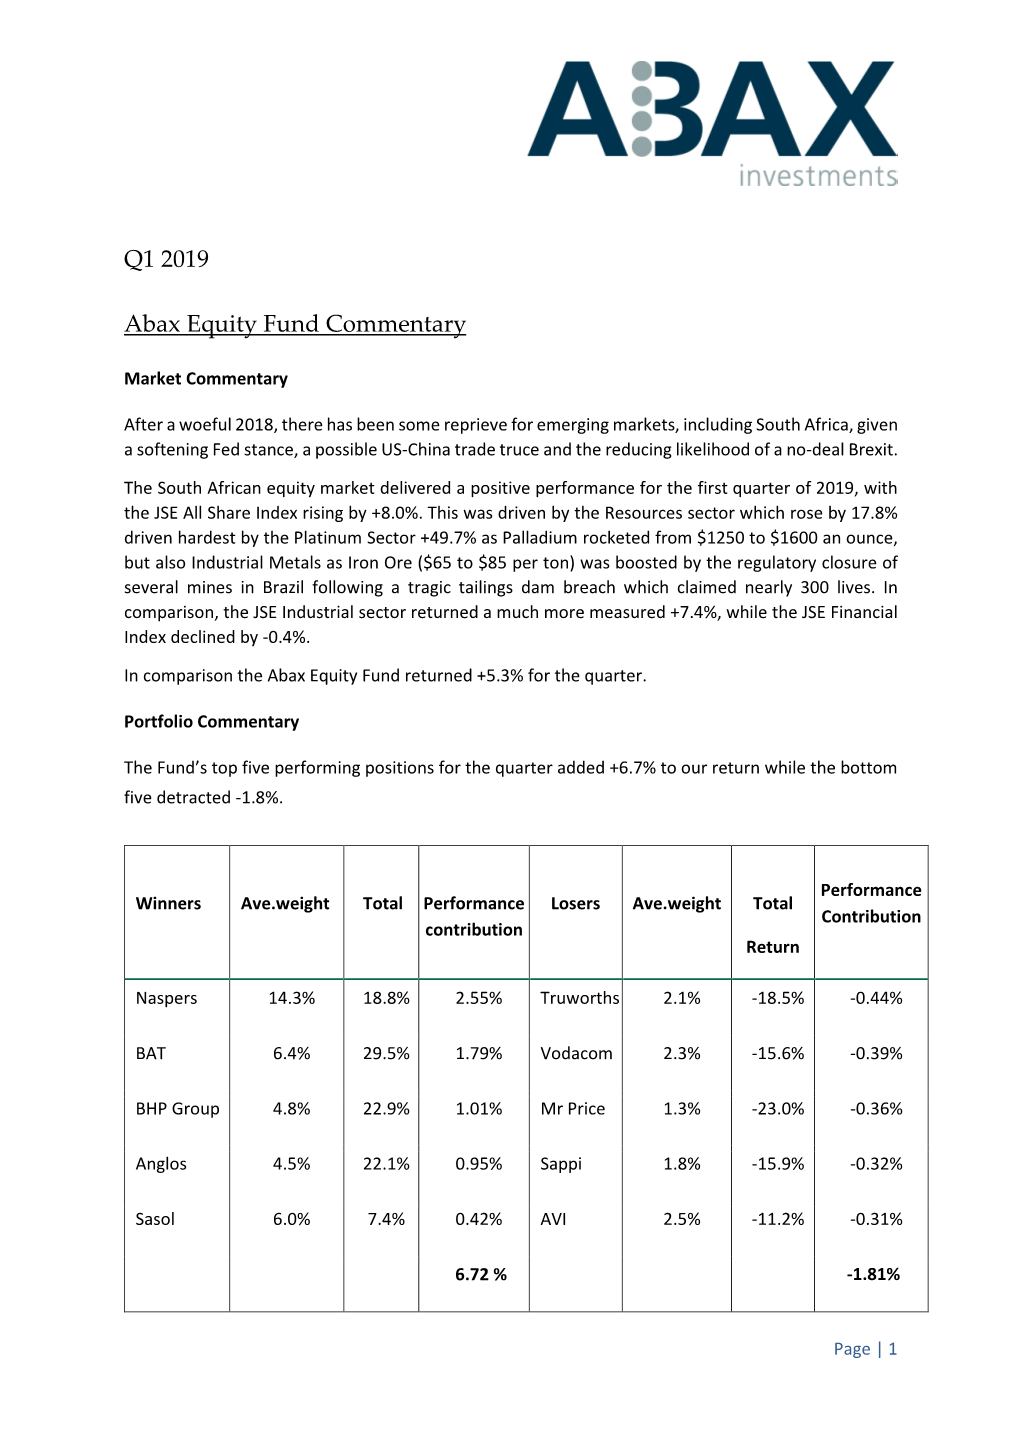 Q1 2019 Abax Equity Fund Commentary